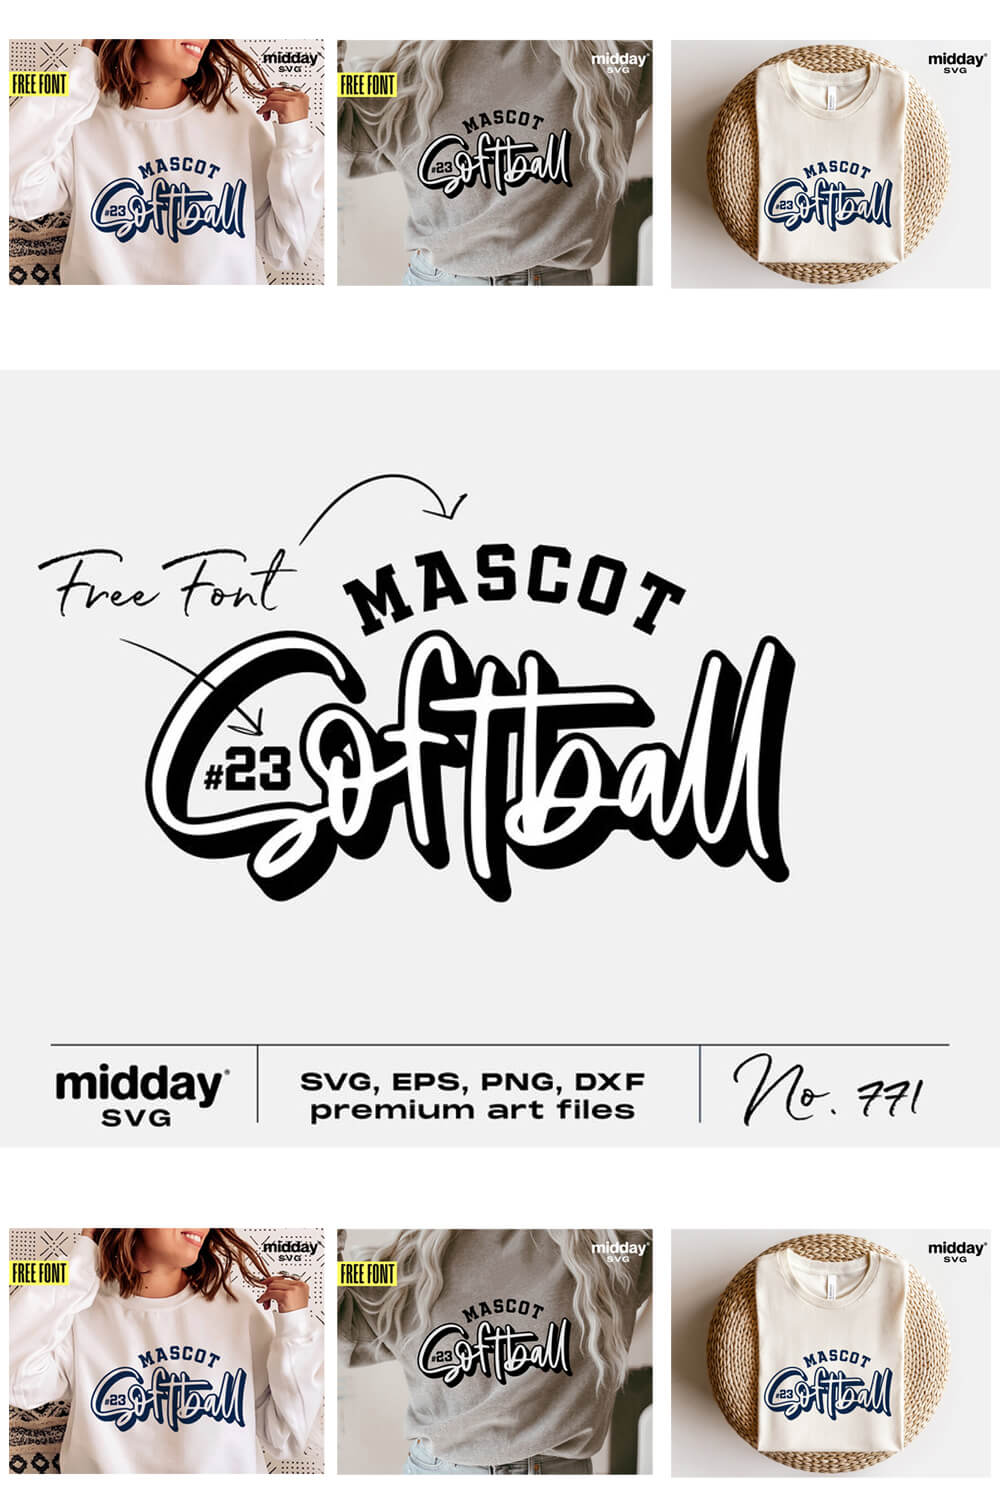 Logotype with inscription: Free Font, Mascot Softball, Midday SVG.